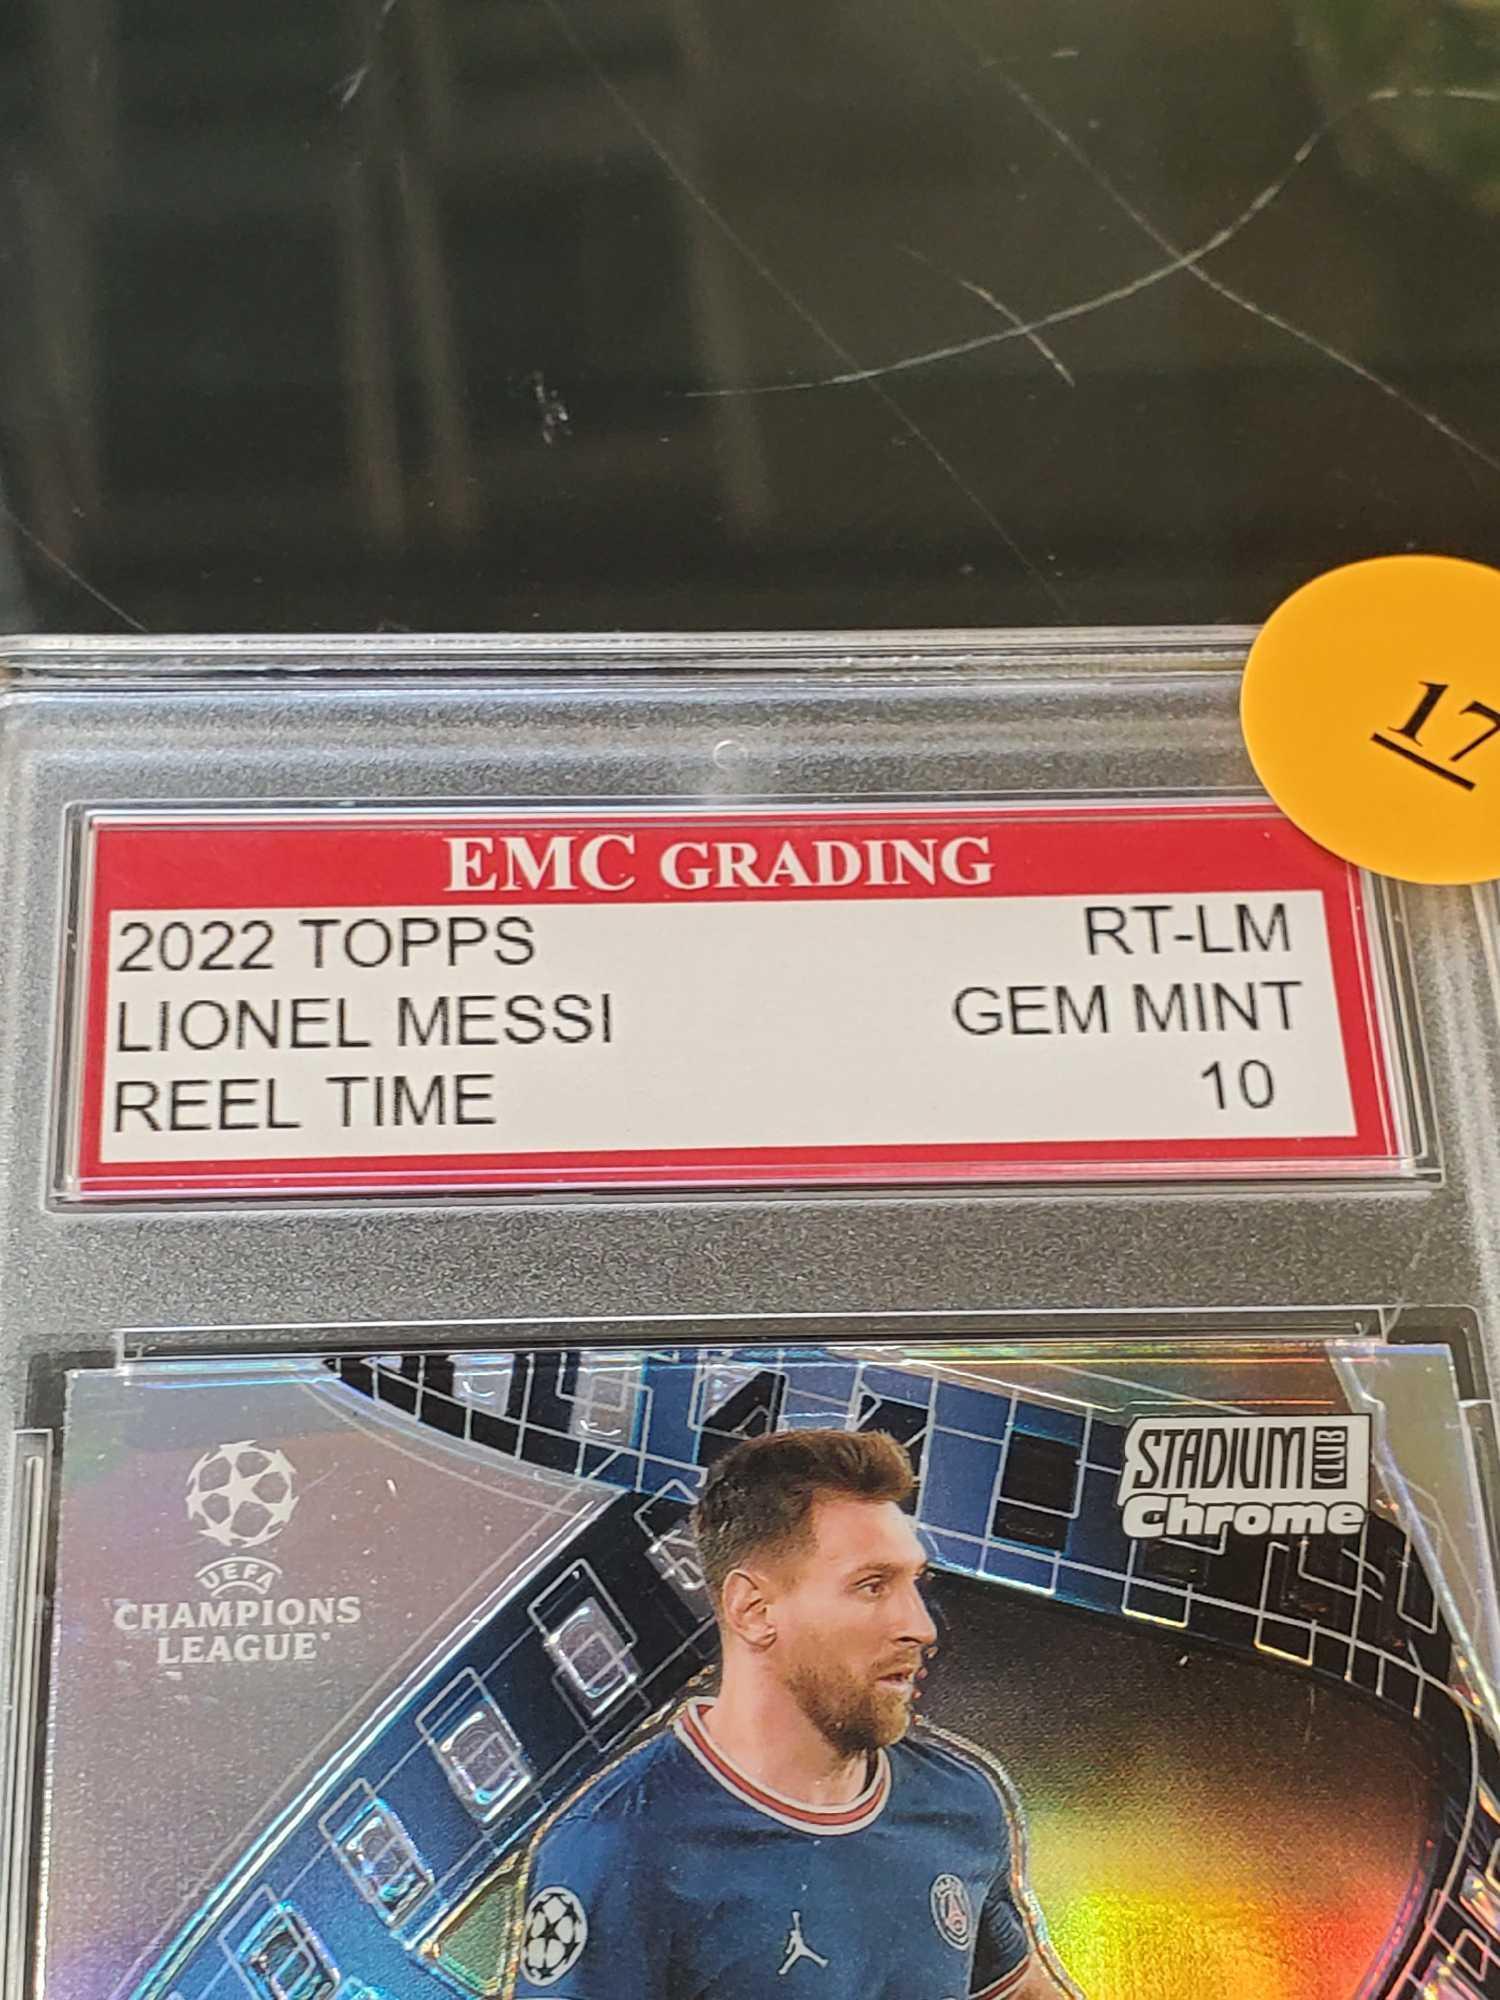 EMC GRADING 2022 TOPPS LIONEL MESSI REEL TIME RT-LM GEM MINT 10, PLEASE SEE THE PICTURES FOR MORE